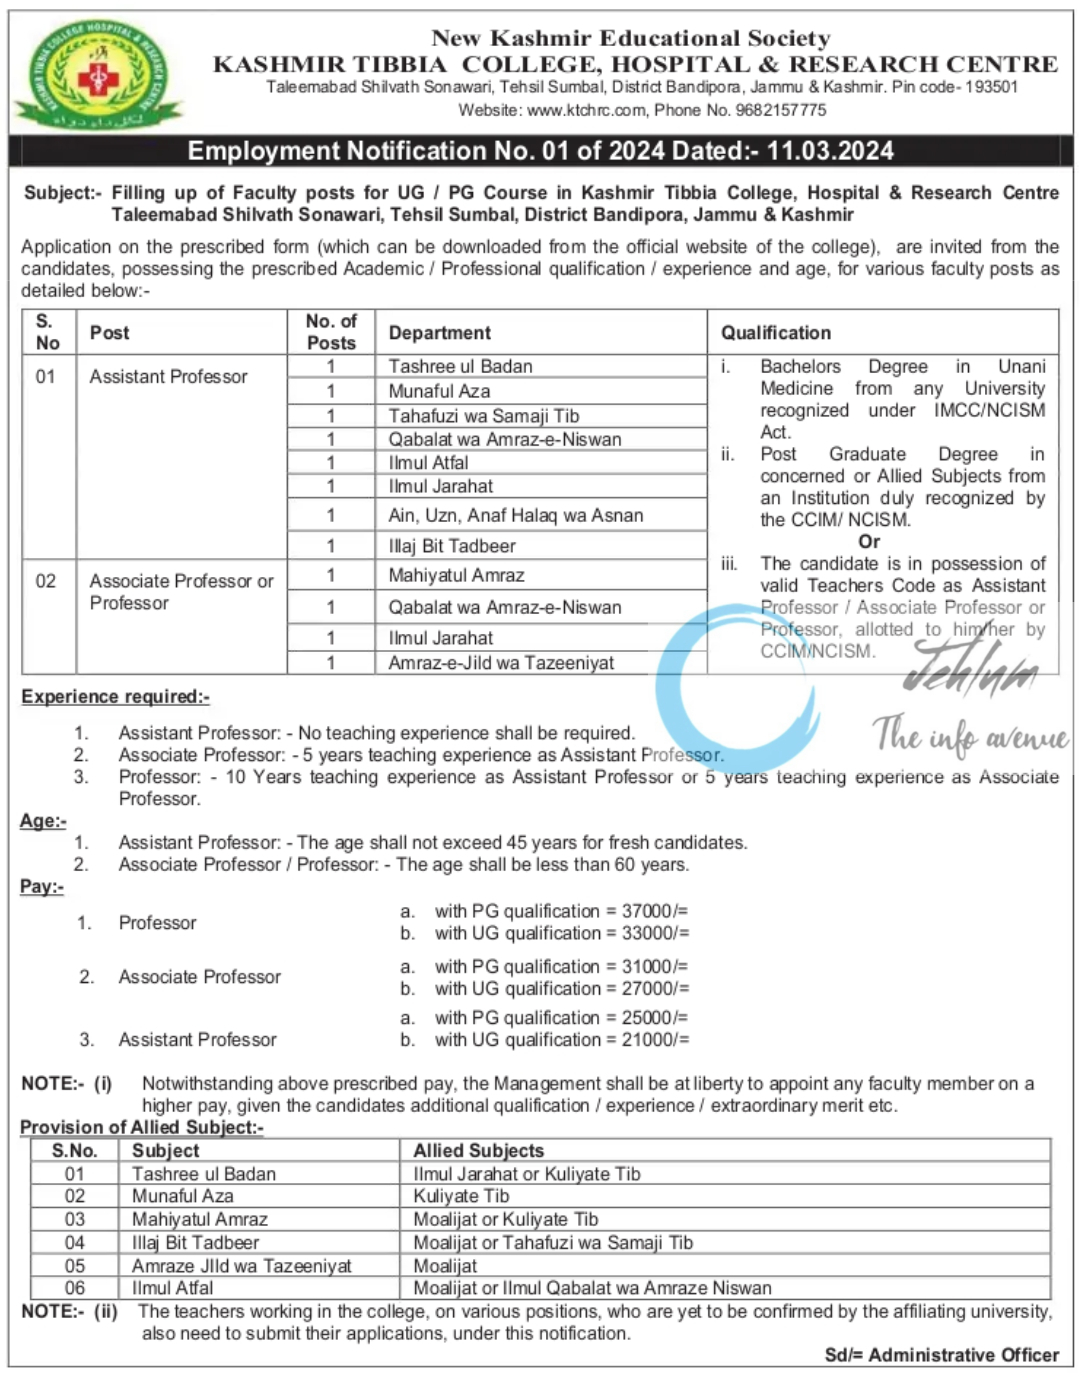 KASHMIR TIBBIA COLLEGE HOSPITAL AND RESEARCH CENTRE EMPLOYMENT NOTIFICATION NO 01 OF 2024